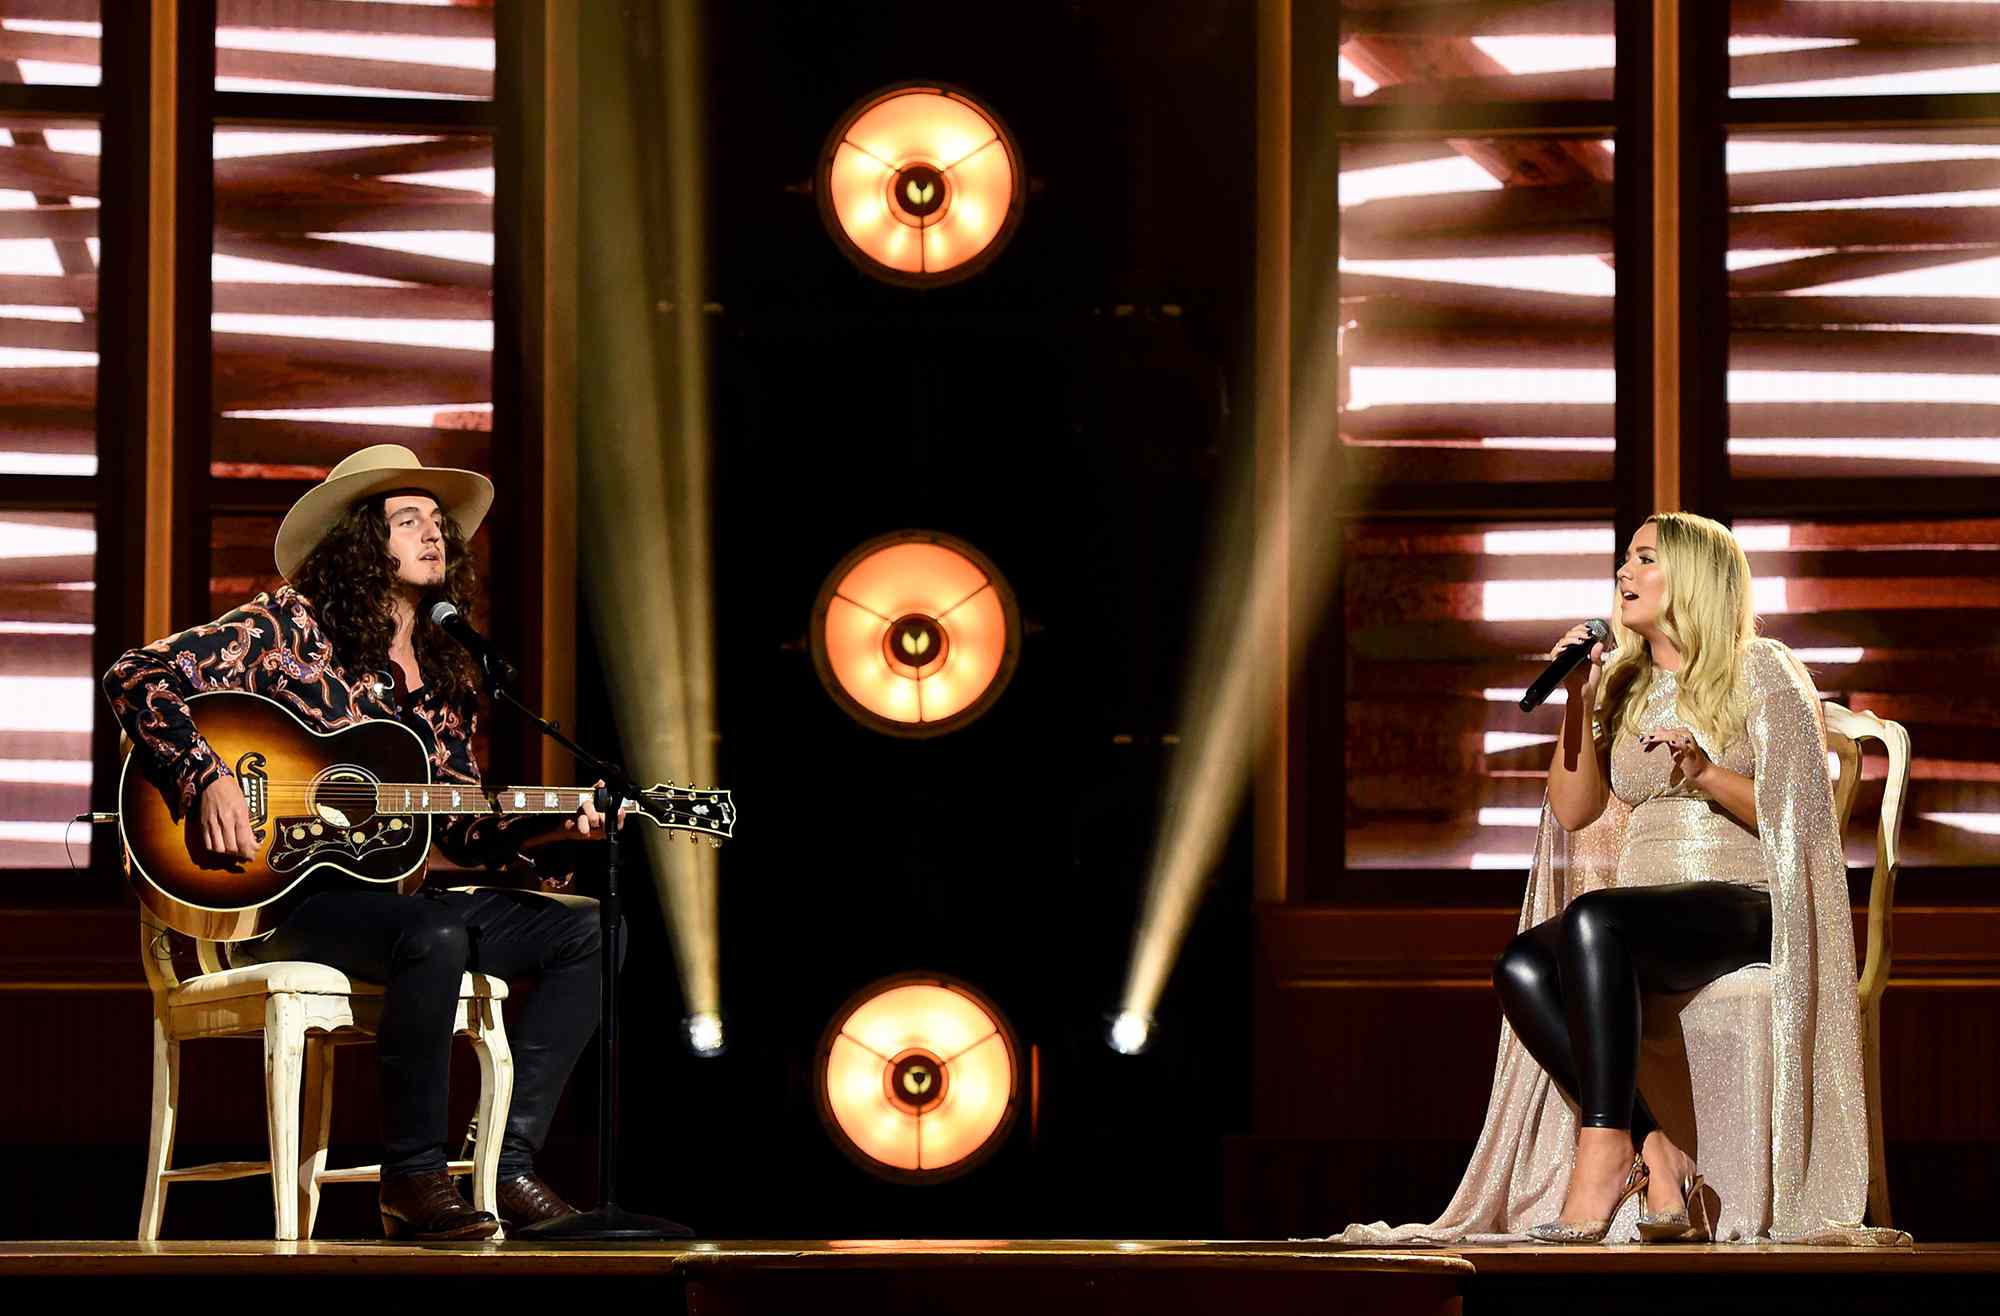 Cade Foehner and Gabby Barrett perform onstage during the 55th Academy of Country Music Awards at Ryman Auditorium on August 25, 2020 in Nashville, Tennessee. The ACM Awards airs on September 16, 2020